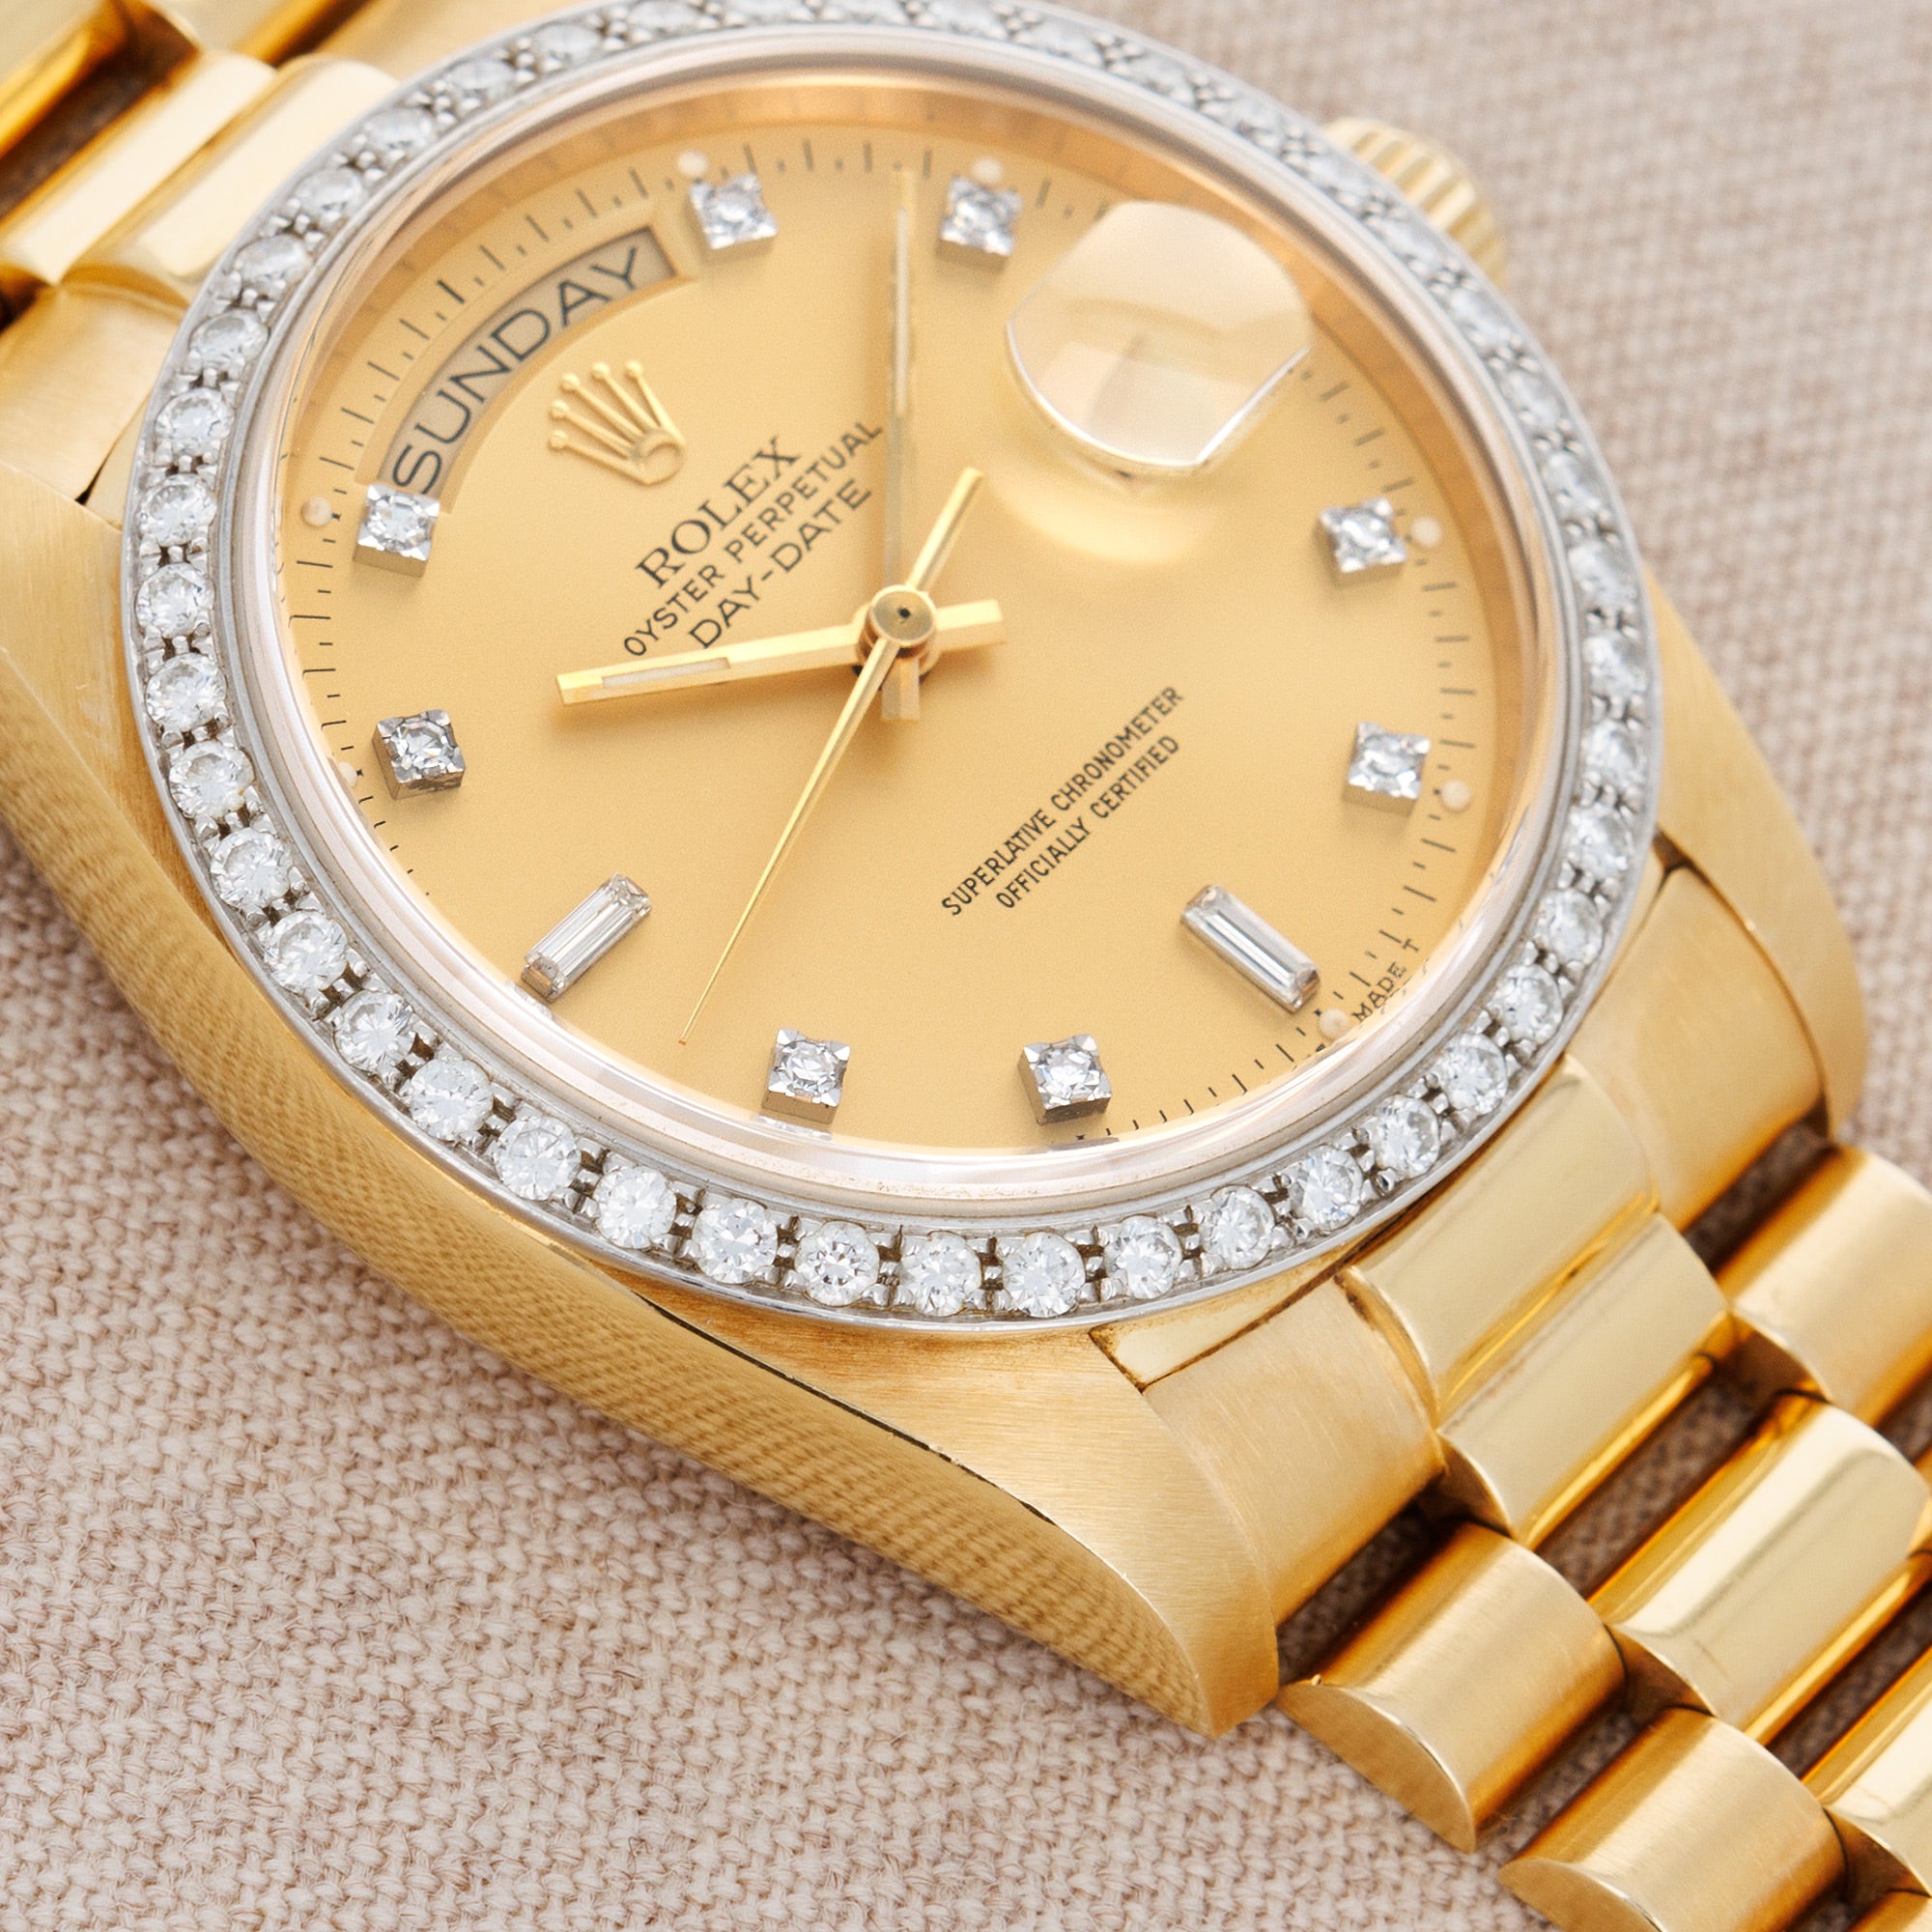 Rolex Yellow Gold Day-Date Ref. 18048